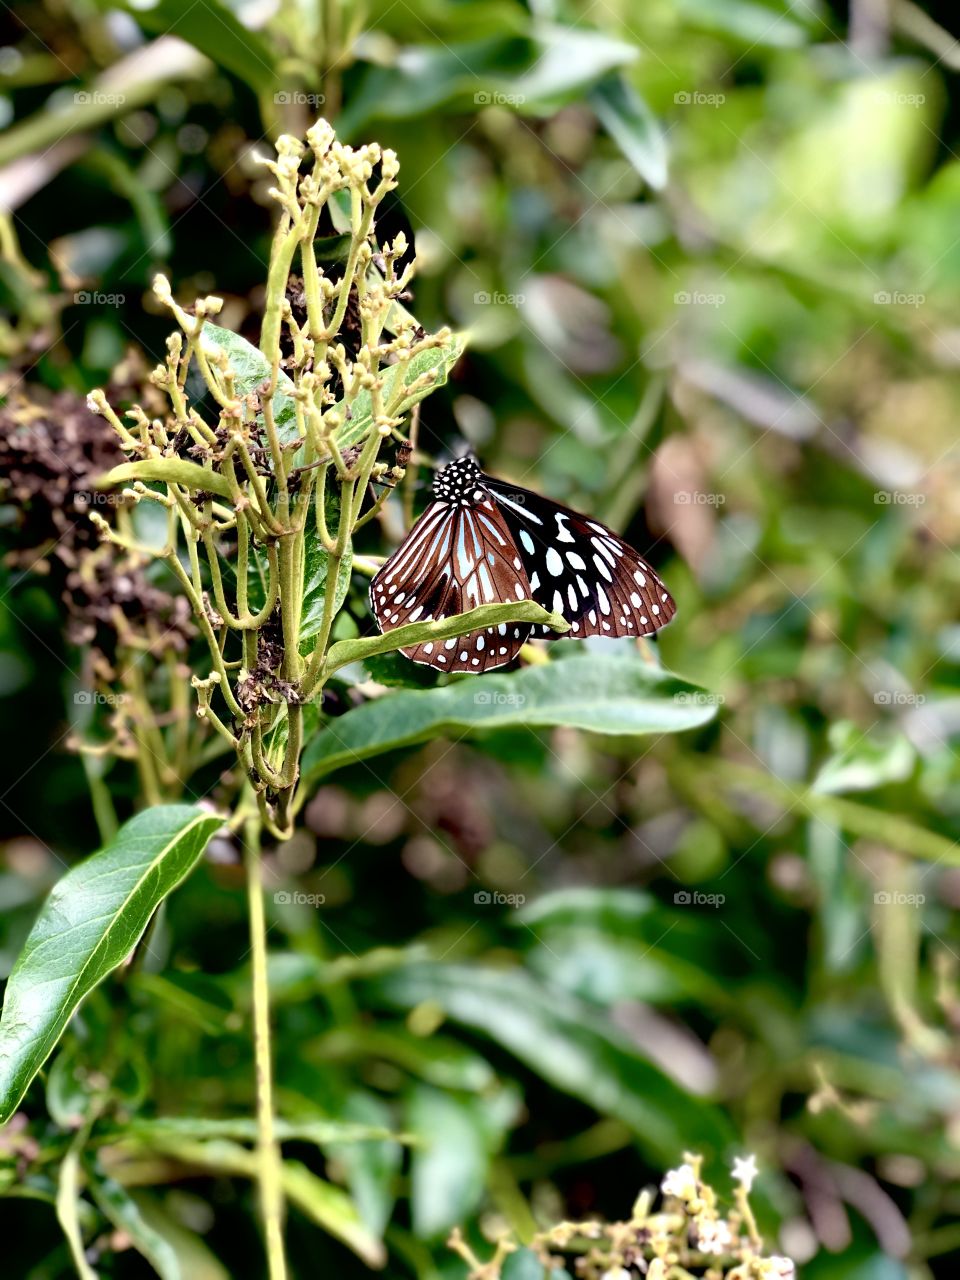 Blue tiger butterfly flourishing in the wild spring wind